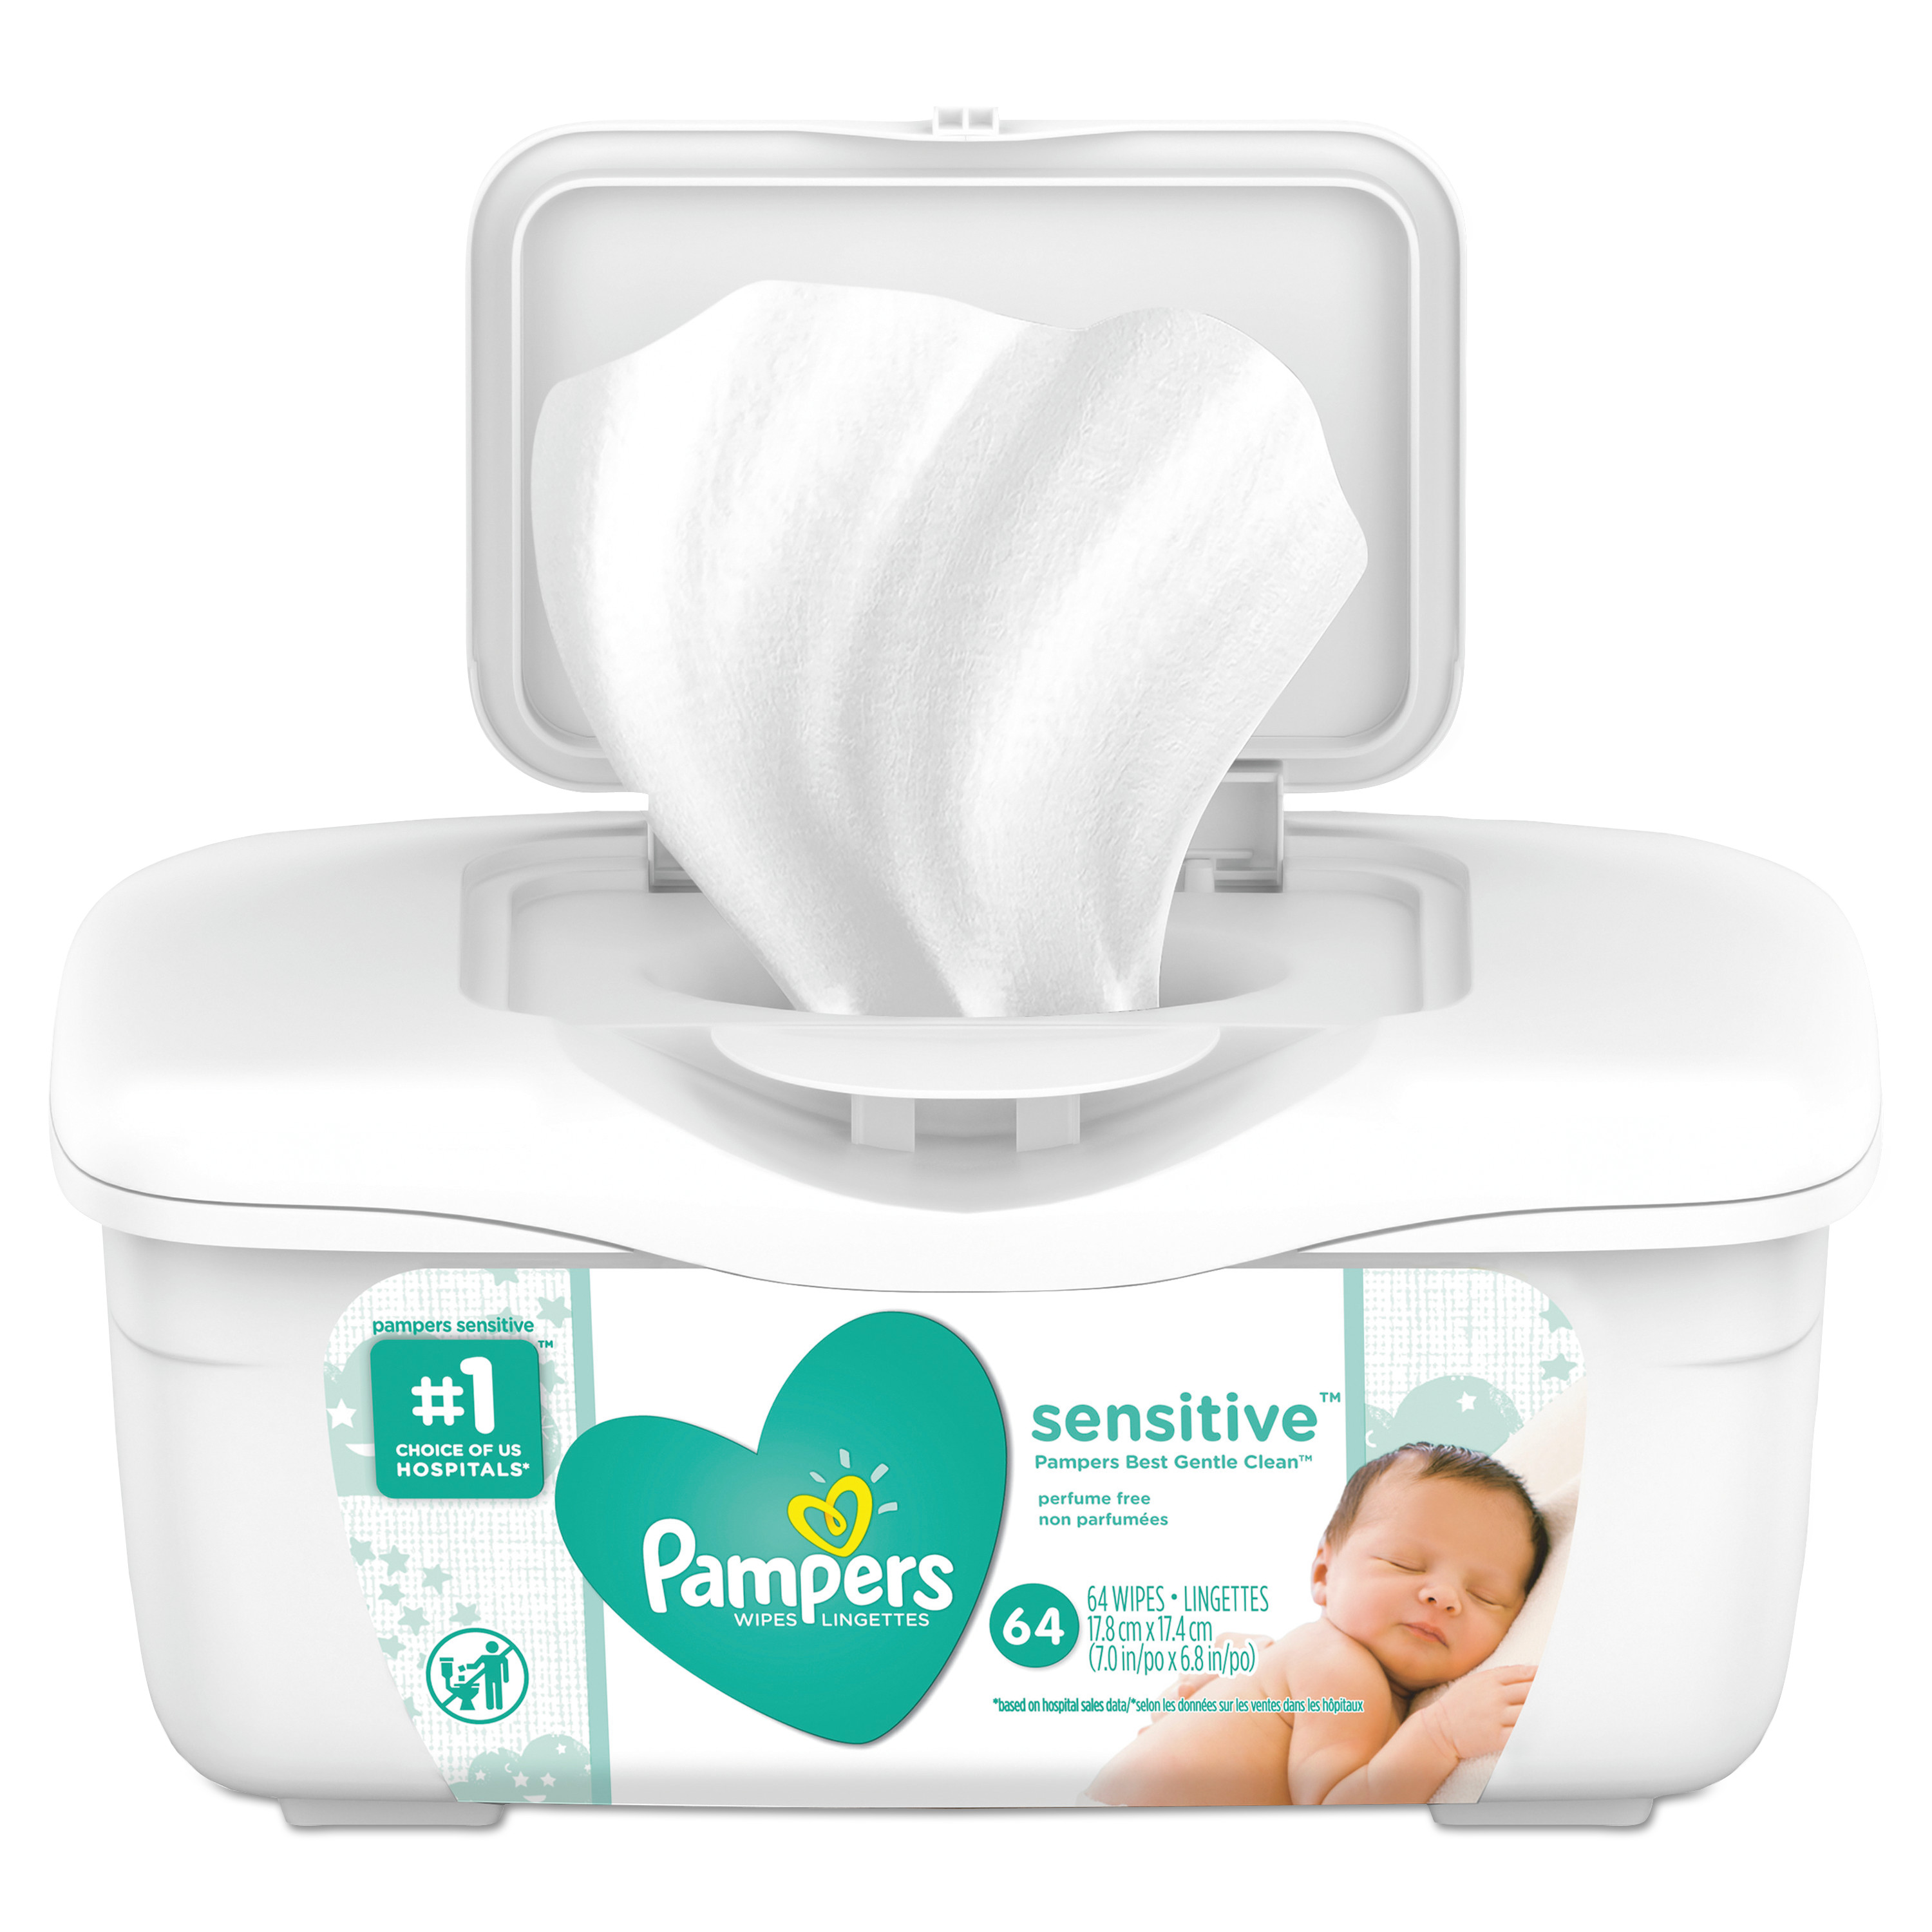  Pampers 19505 Sensitive Baby Wipes, White, Cotton, Unscented, 64/Tub, 8 Tub/Carton (PGC19505CT) 